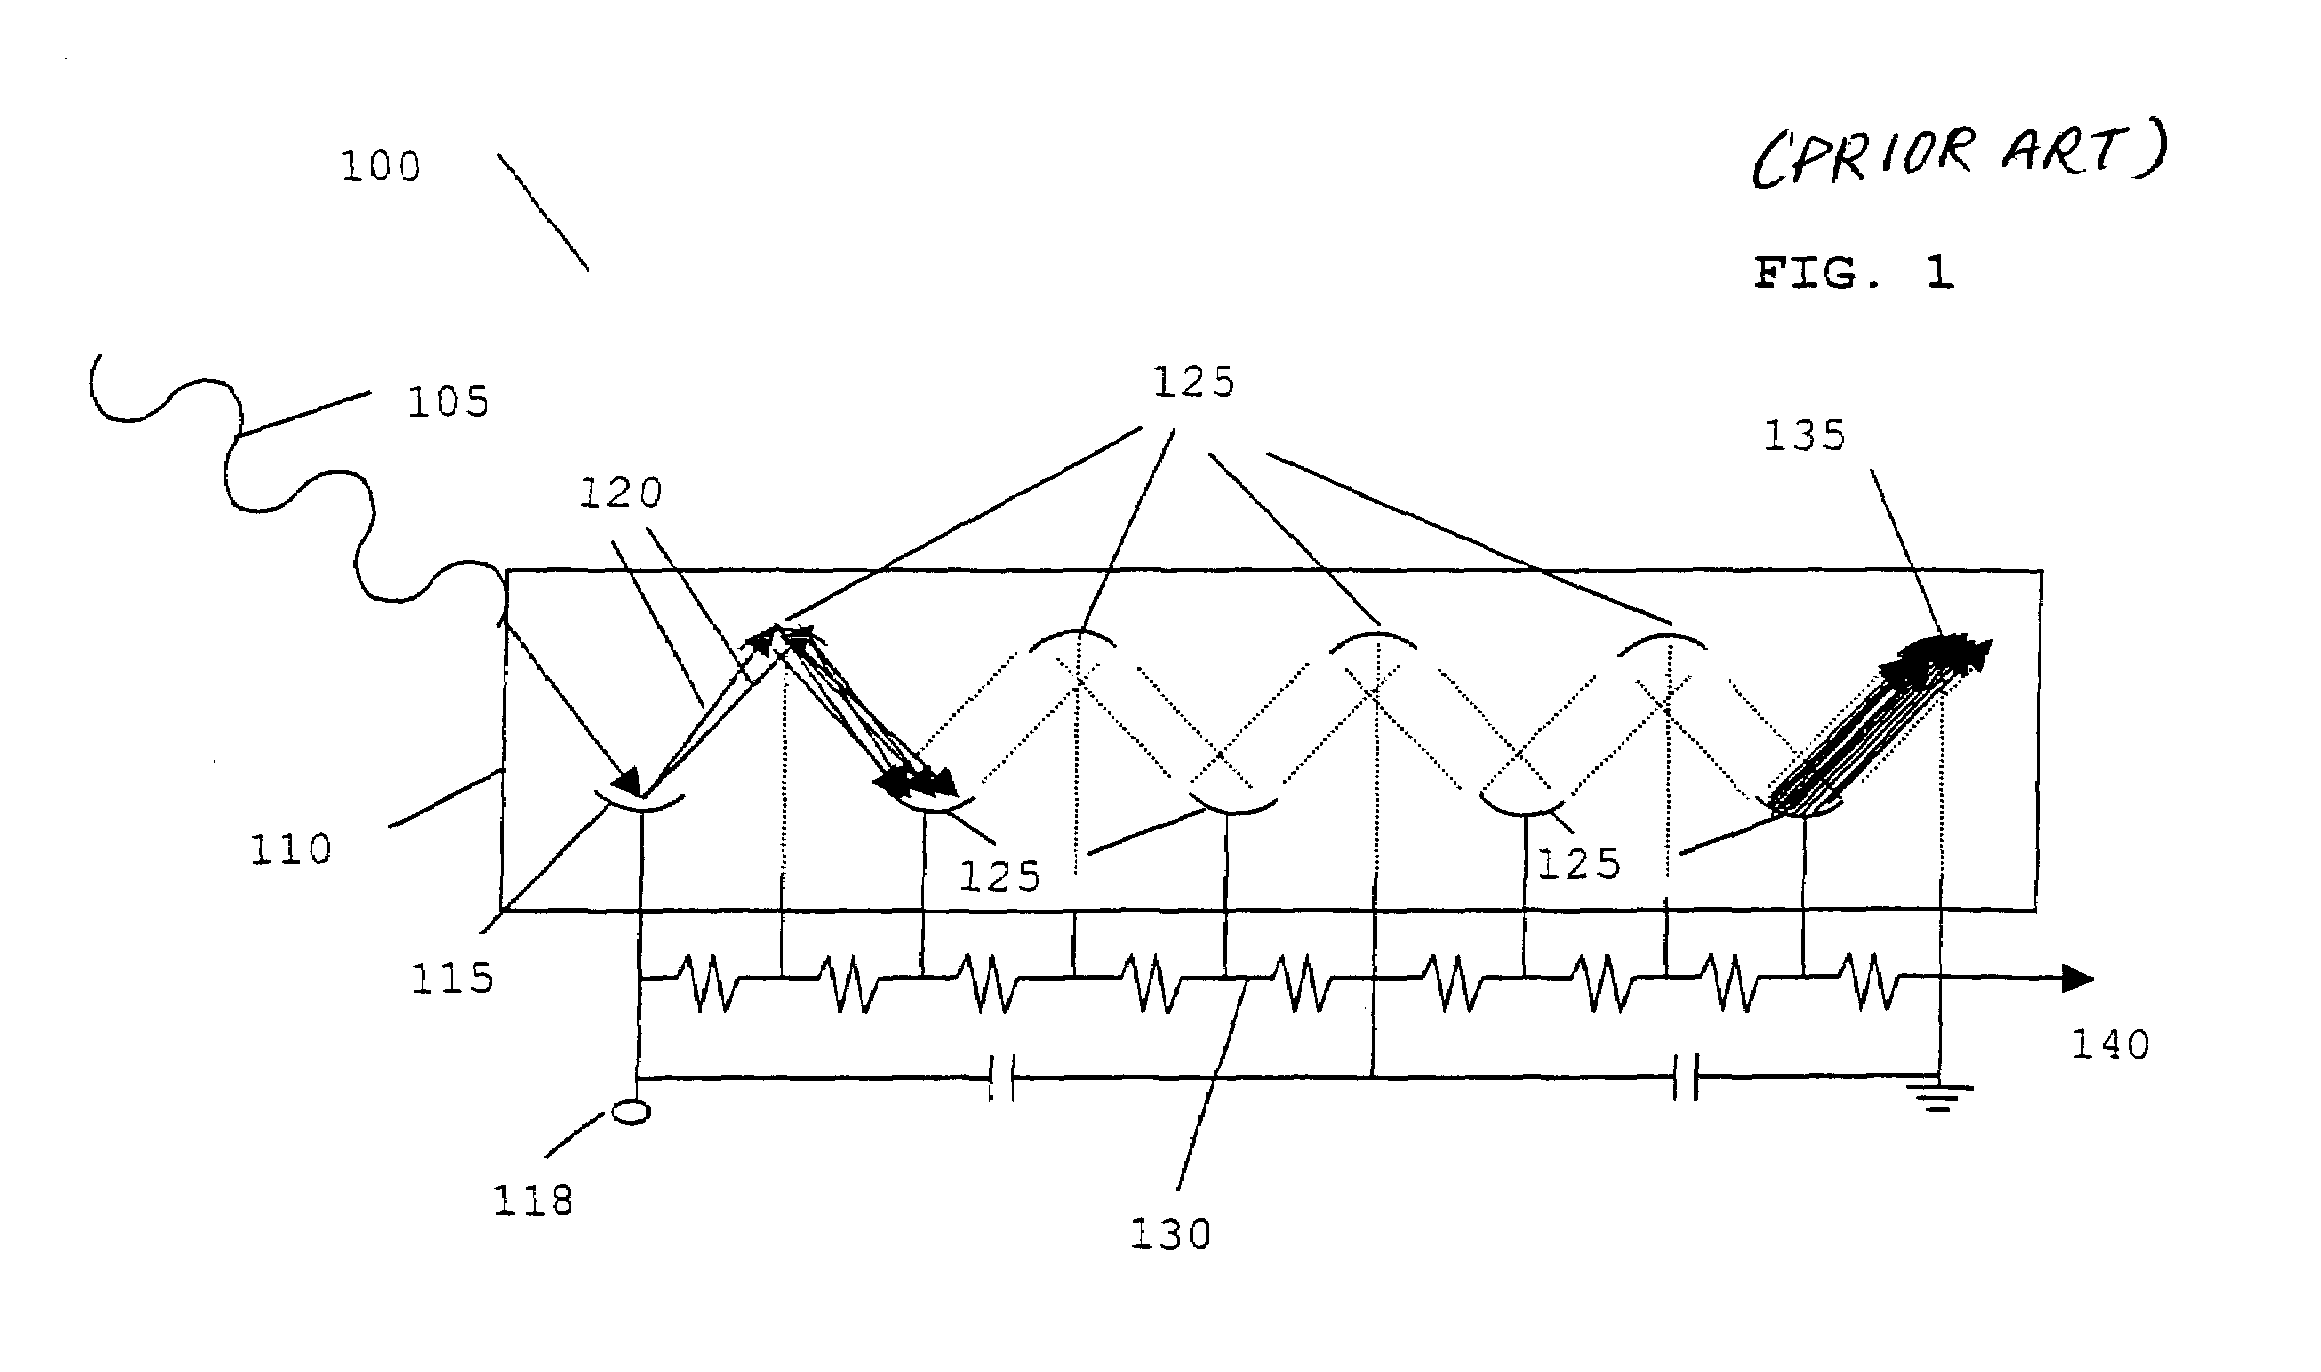 Amplifier circuit with a switching device to provide a wide dynamic output range